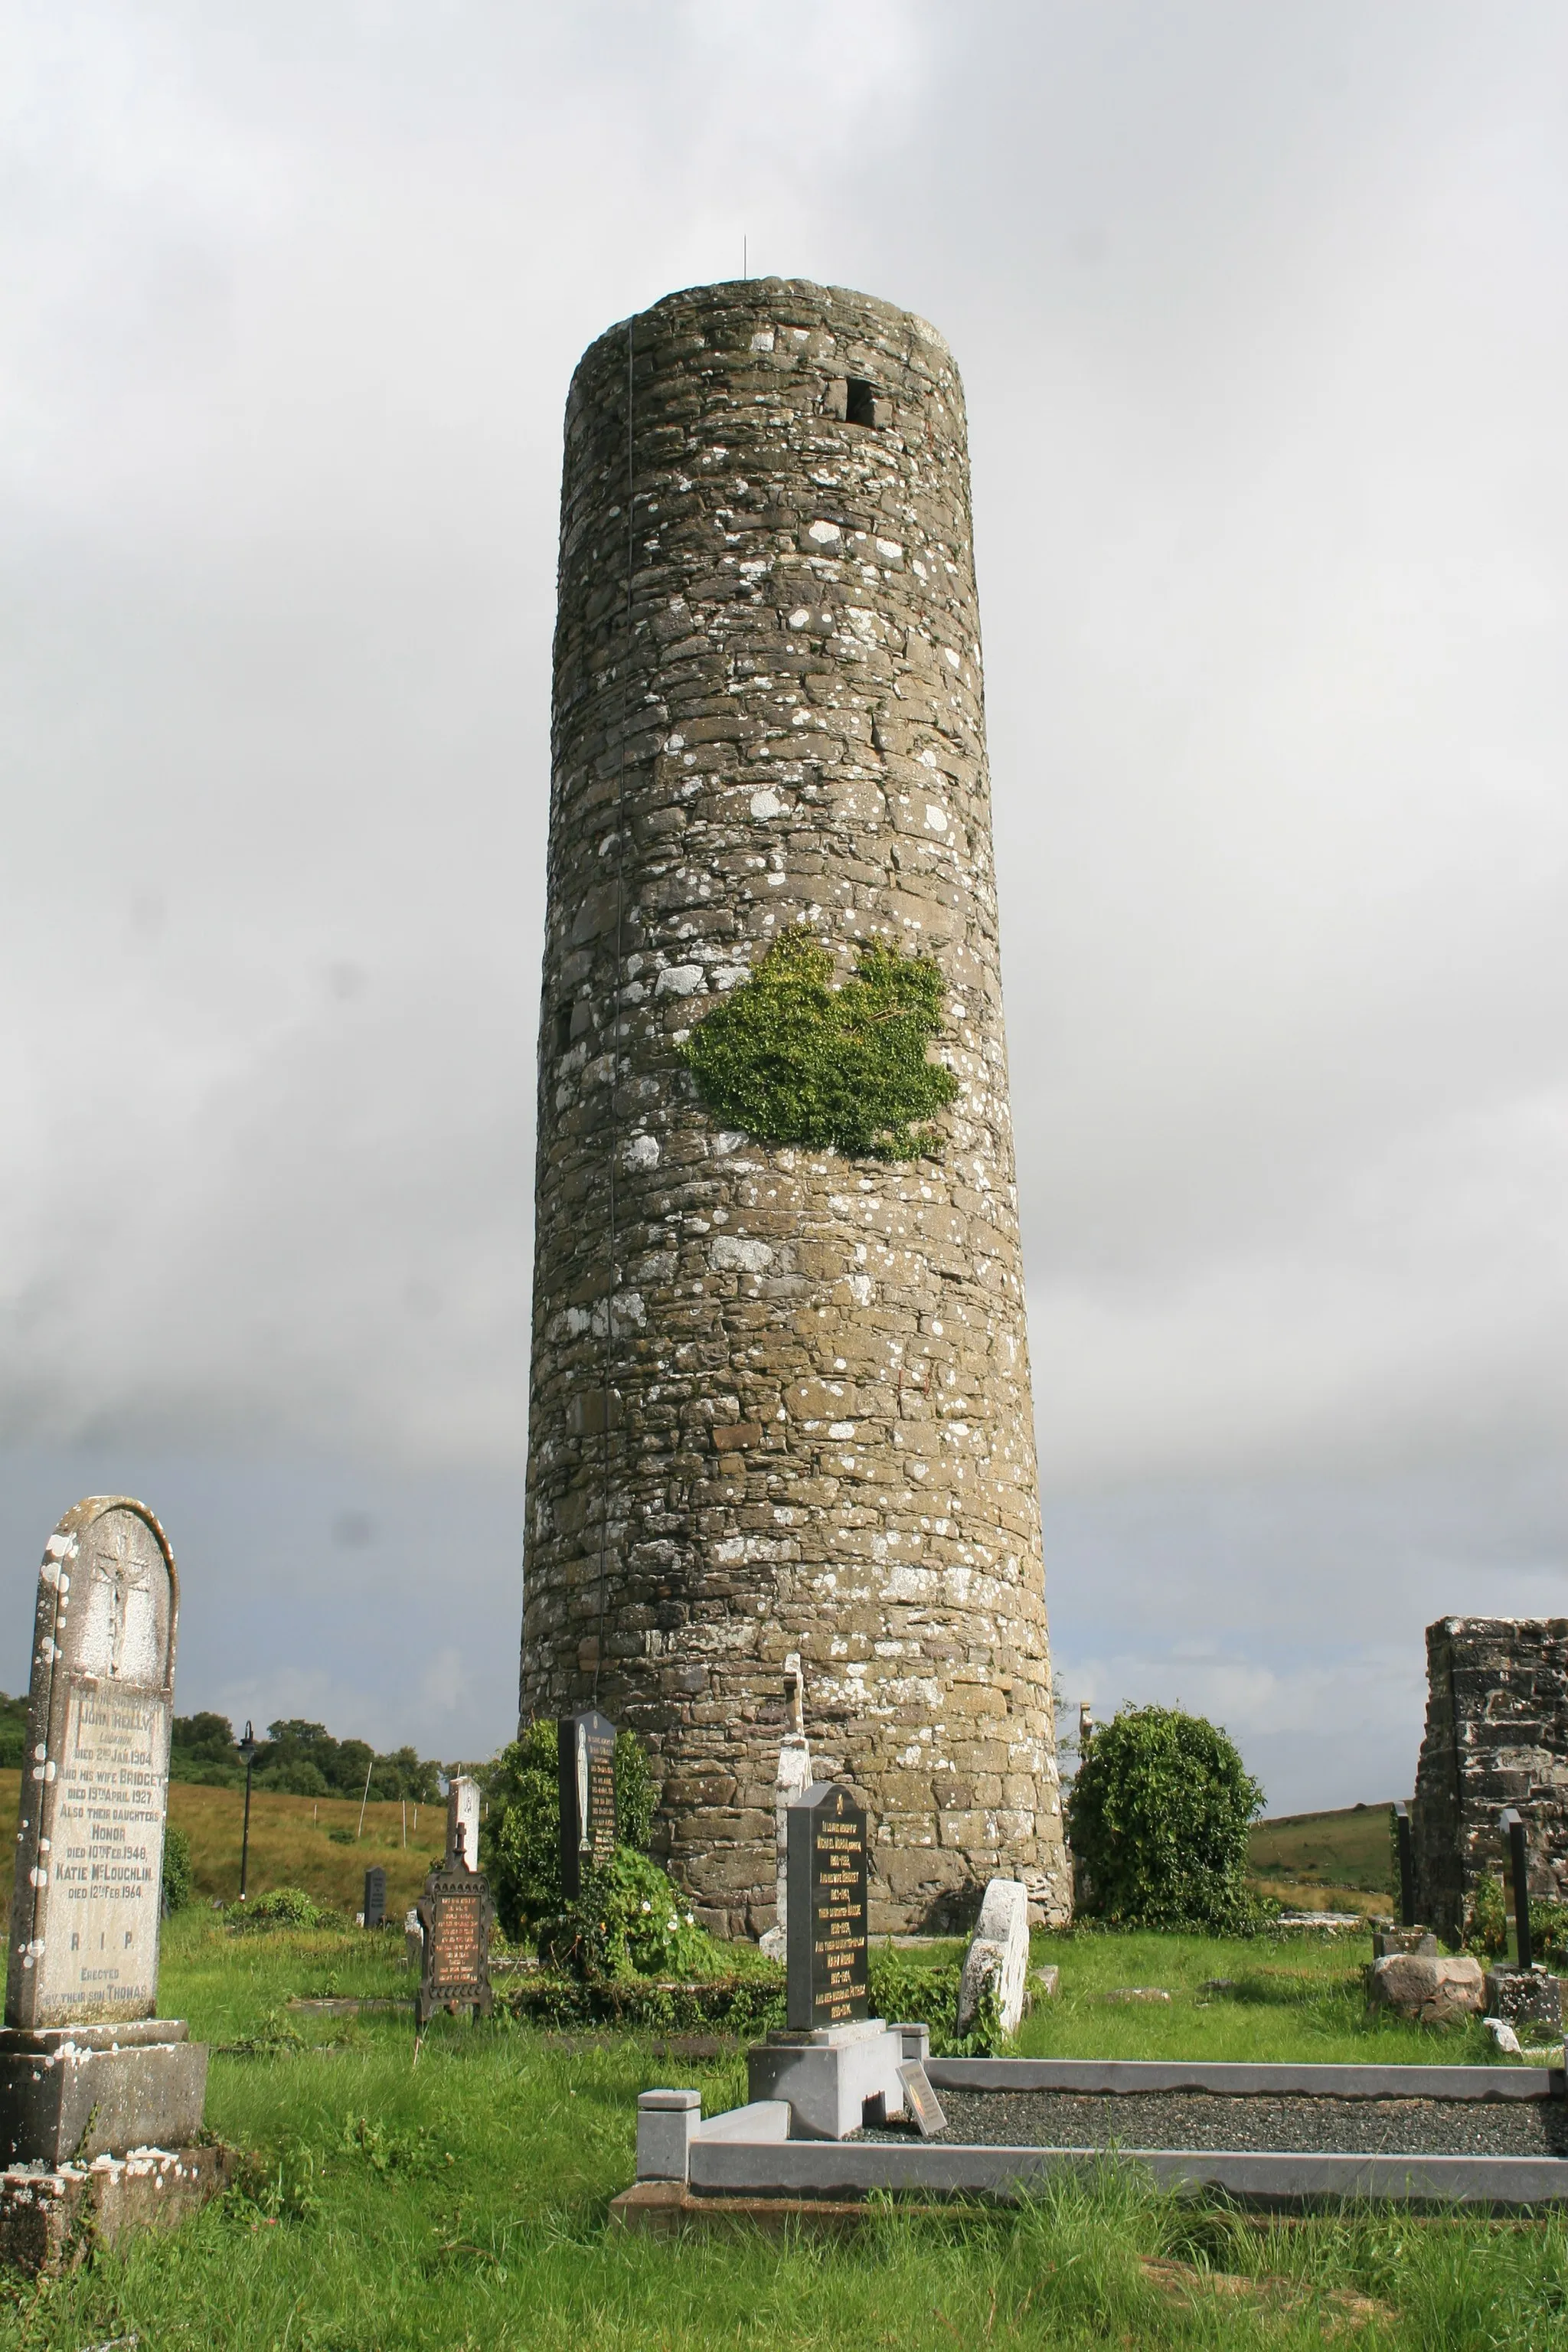 Photo showing: Aghagower, County Mayo, Ireland

Round tower of the monastic site at Aghagower